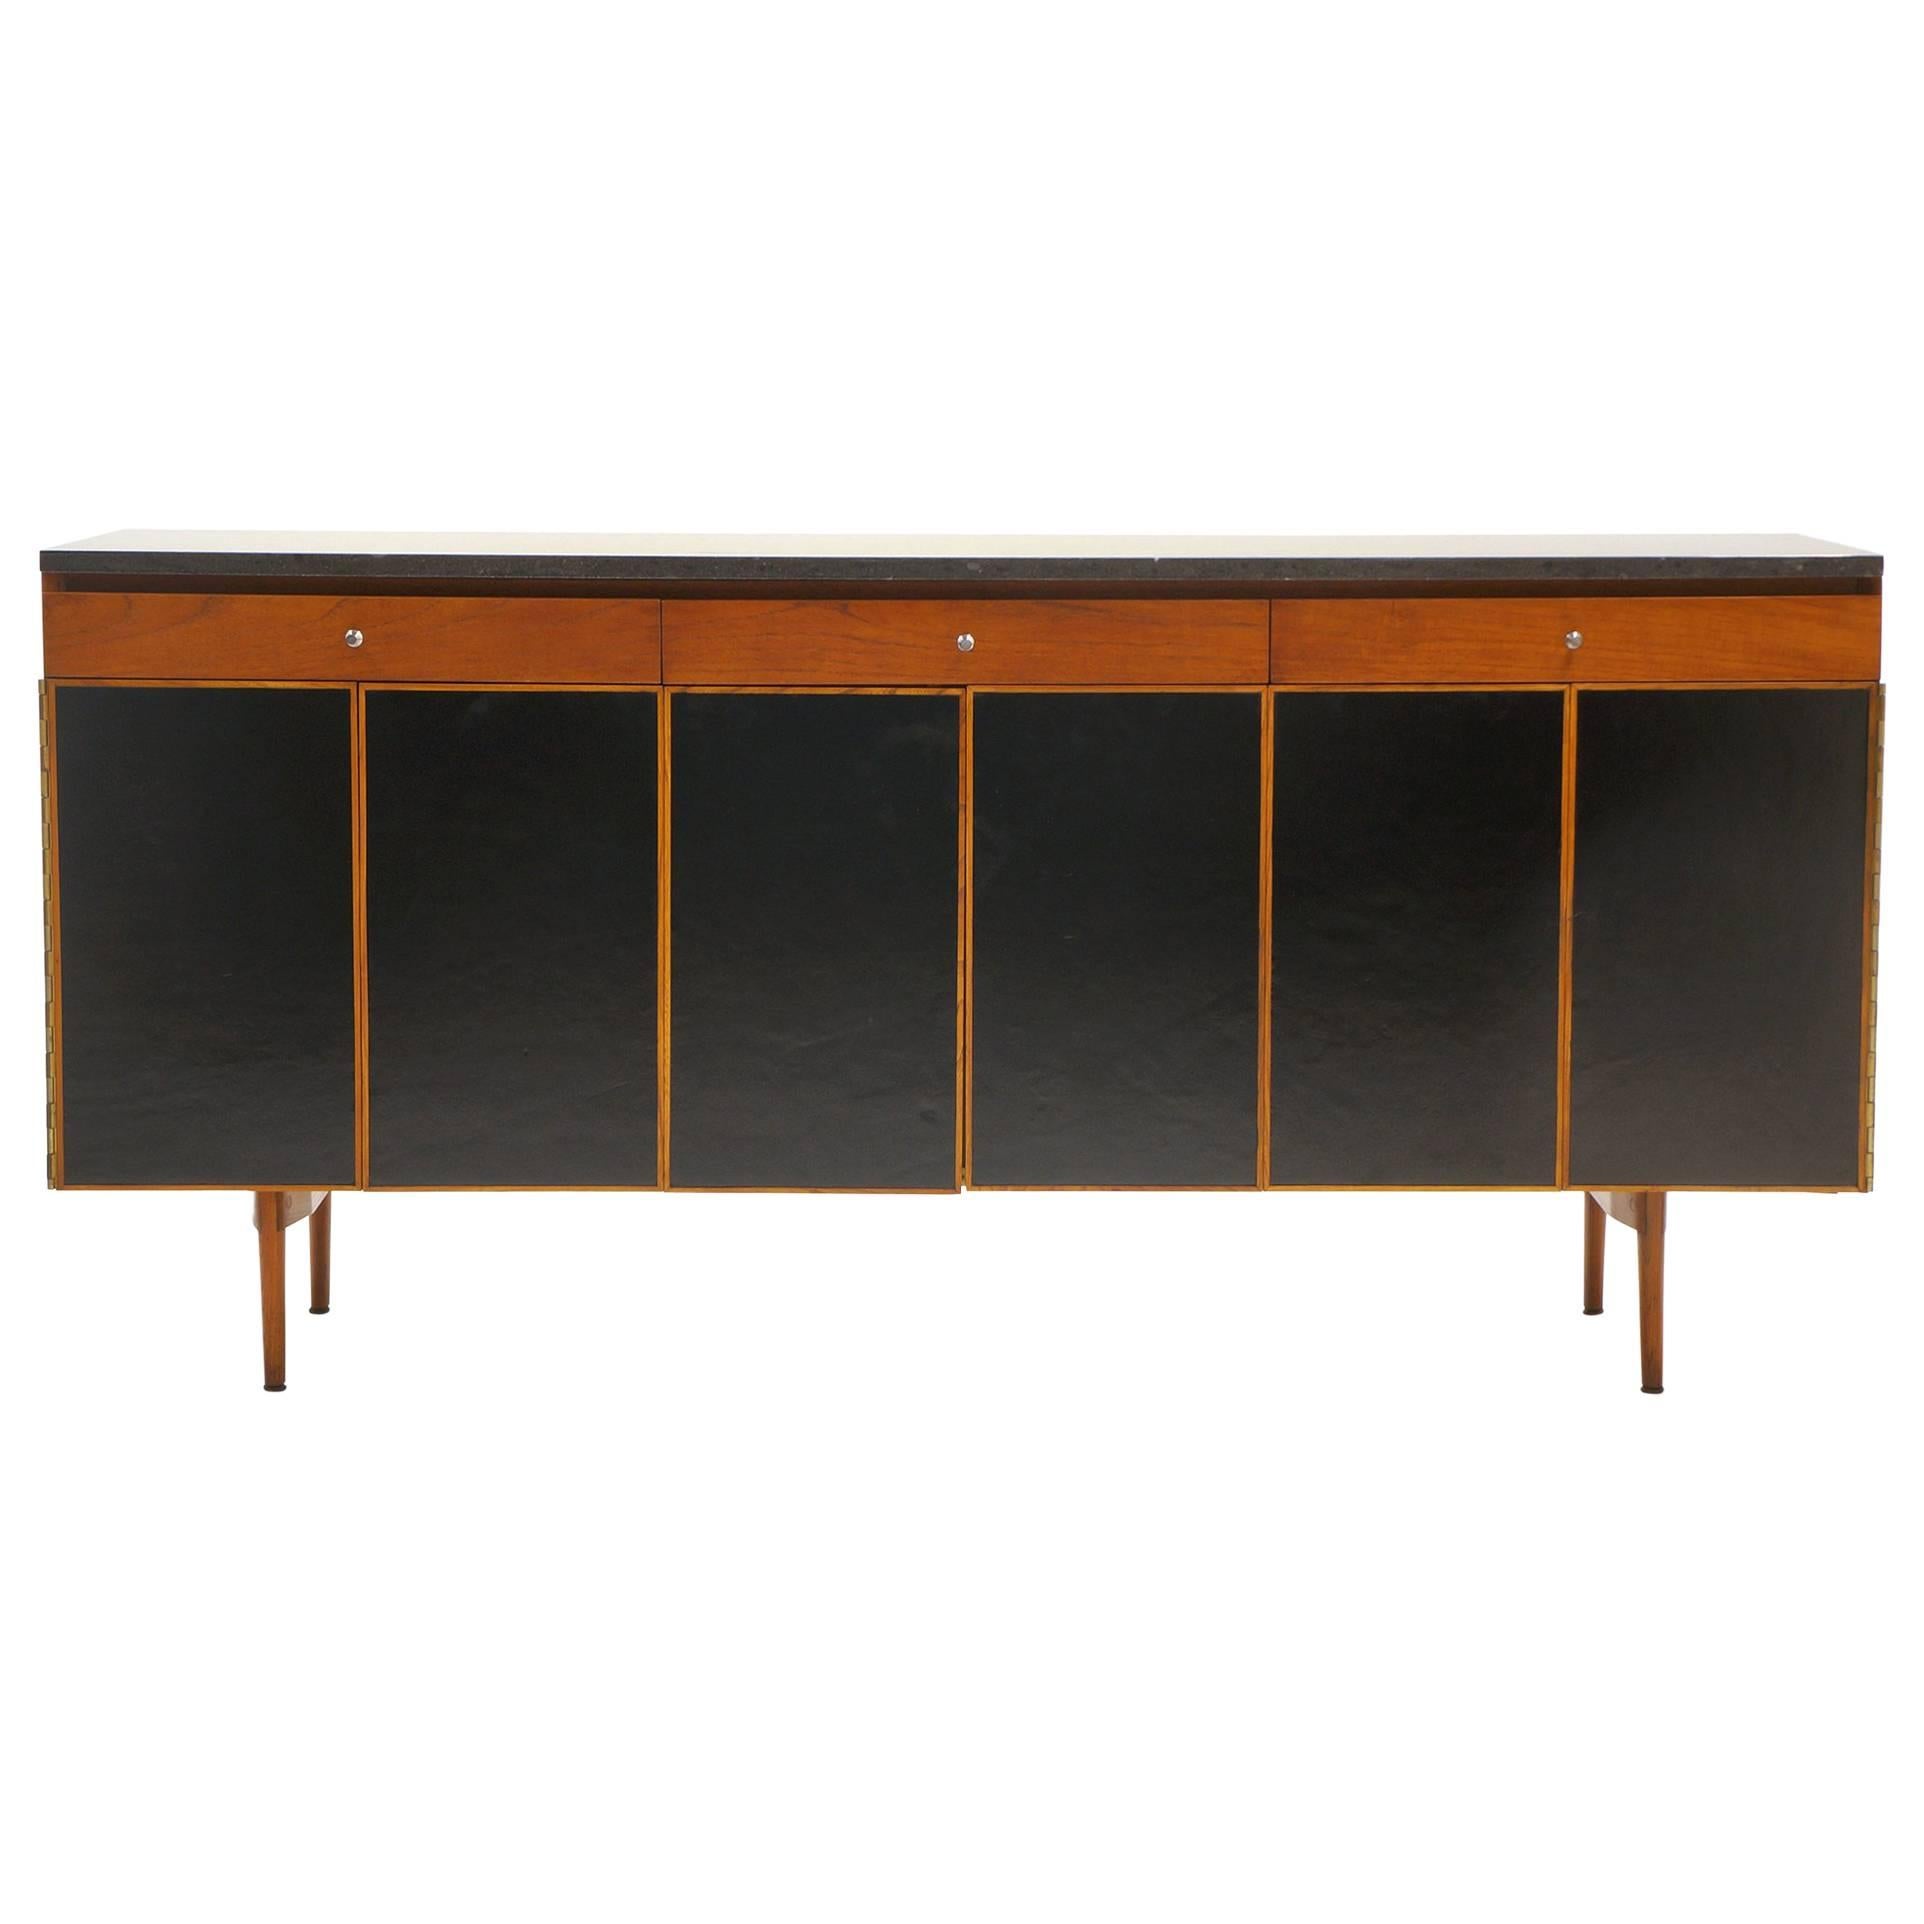 Paul McCobb Credenza or Sideboard, Walnut with Original Marble Top